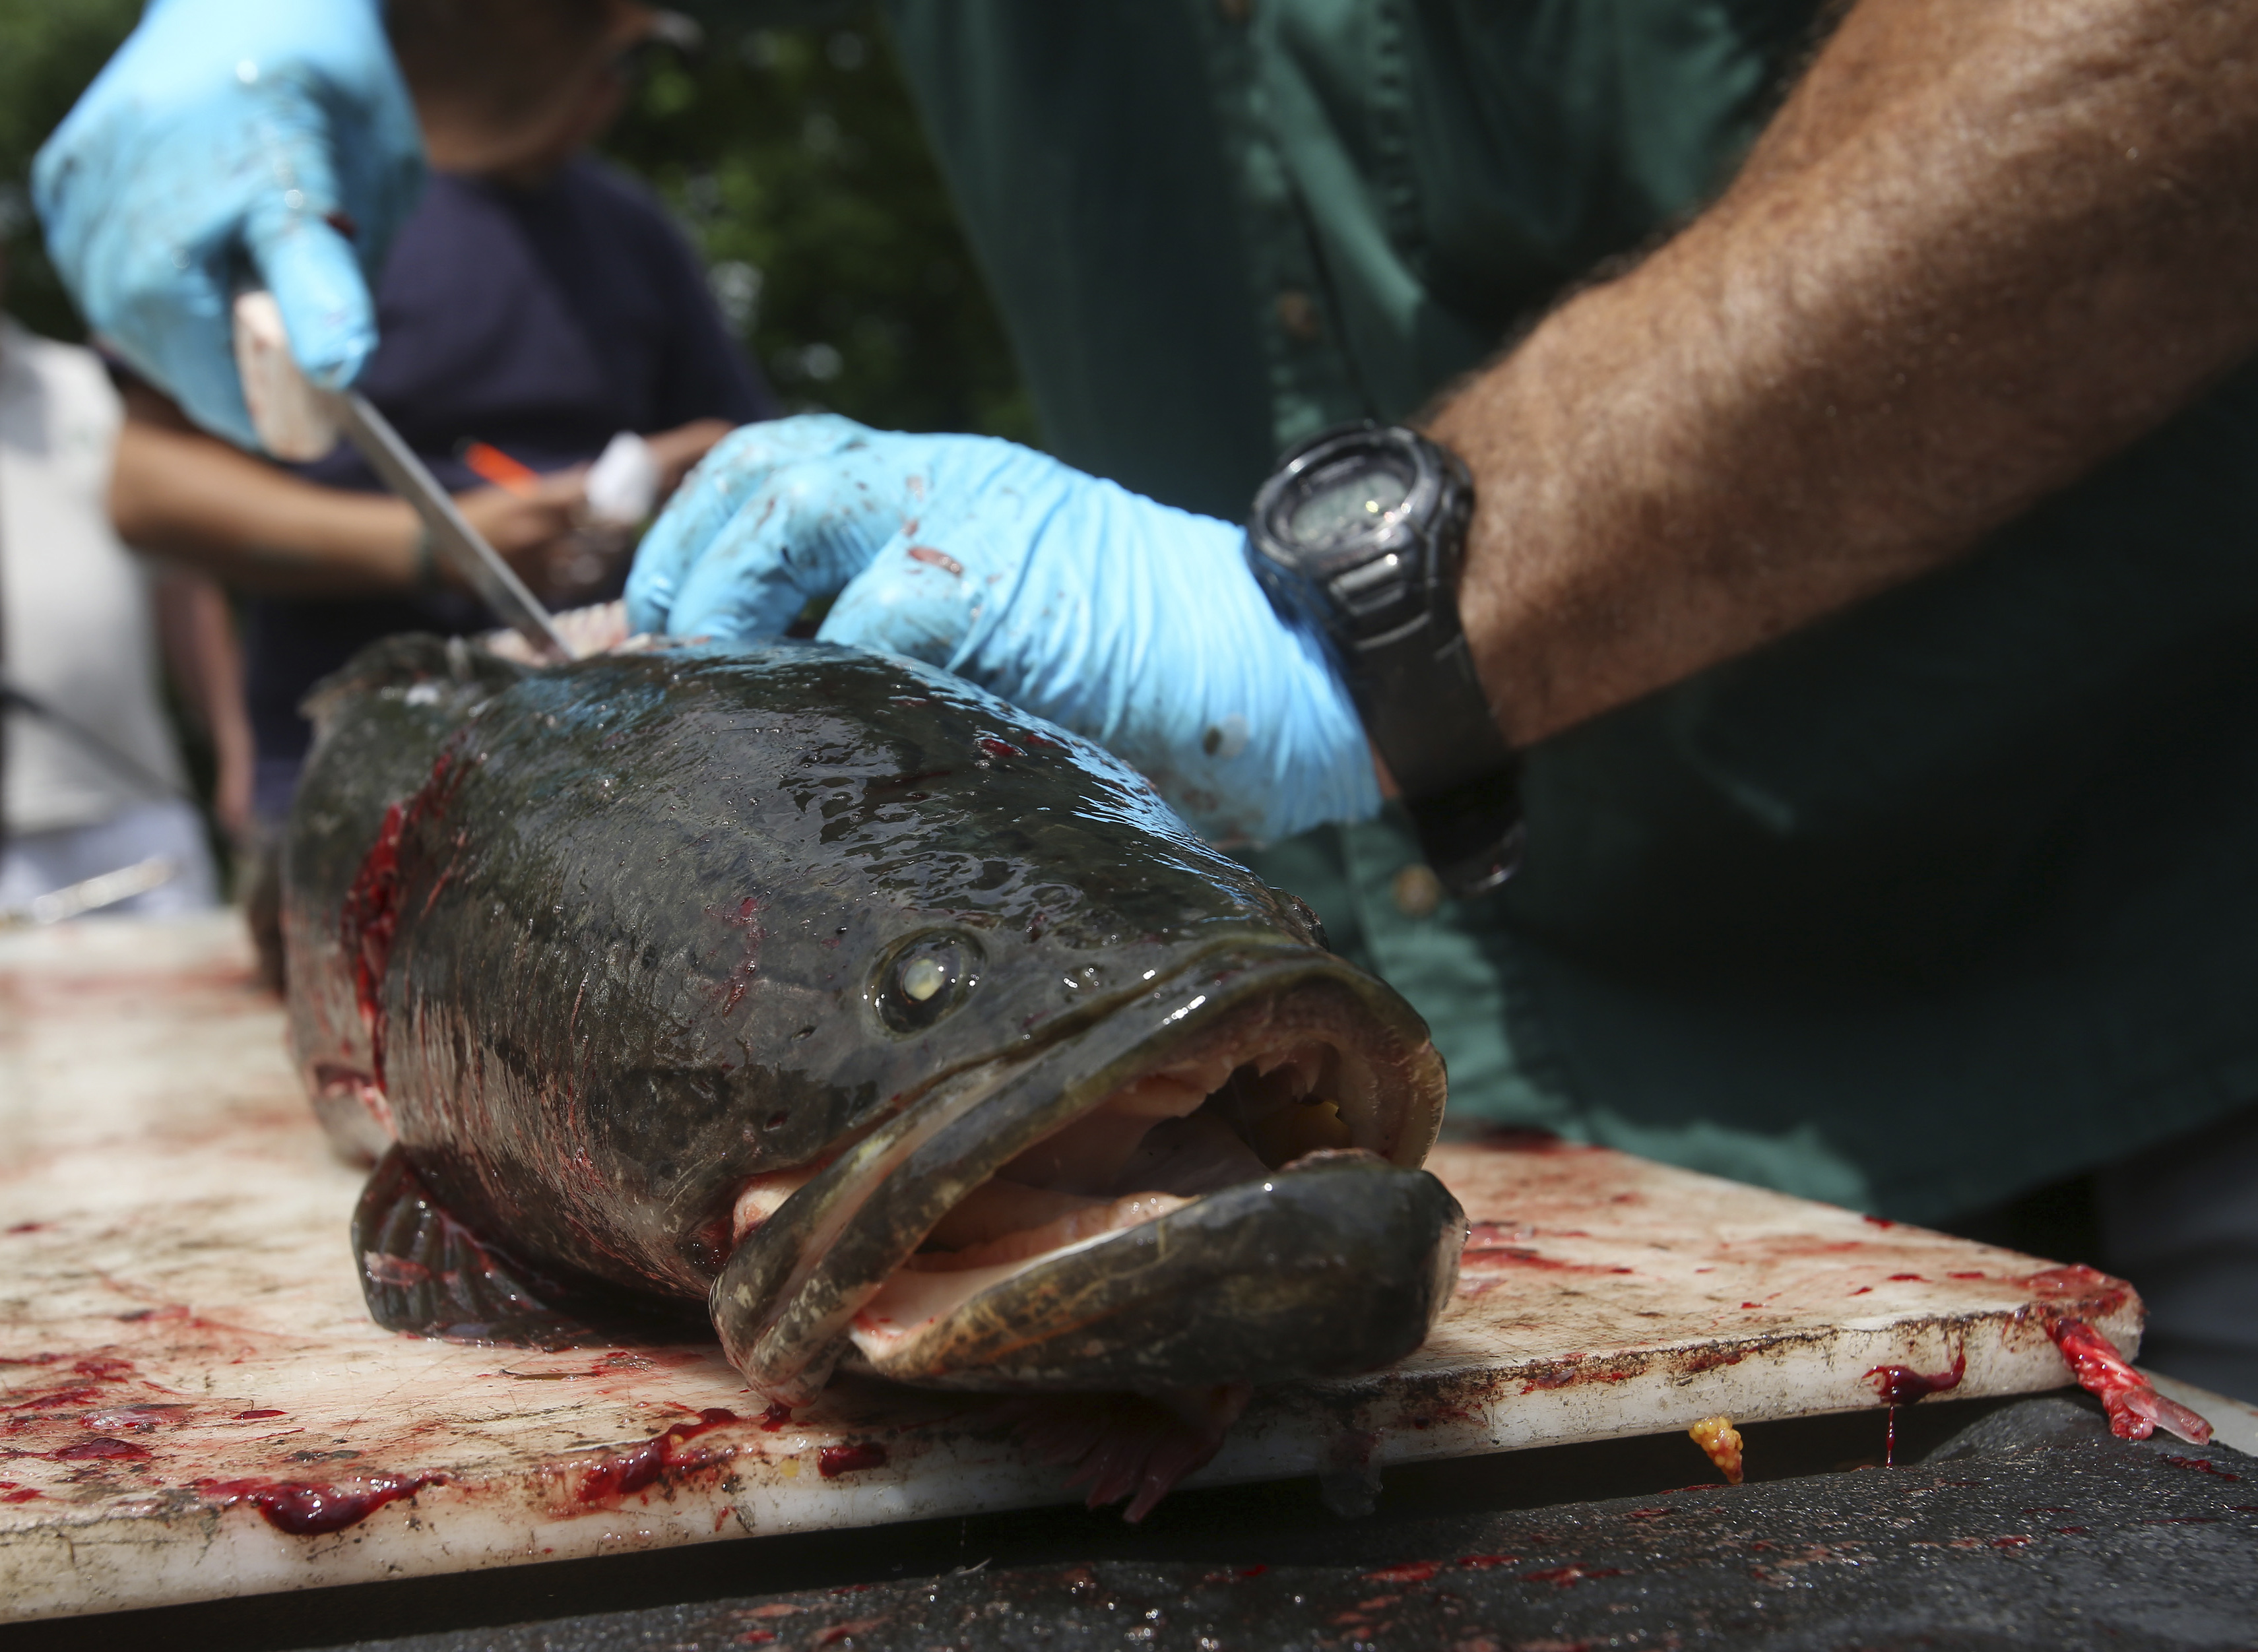 A large northern snakehead fish is dissected and filleted before becoming a delicious dinner.